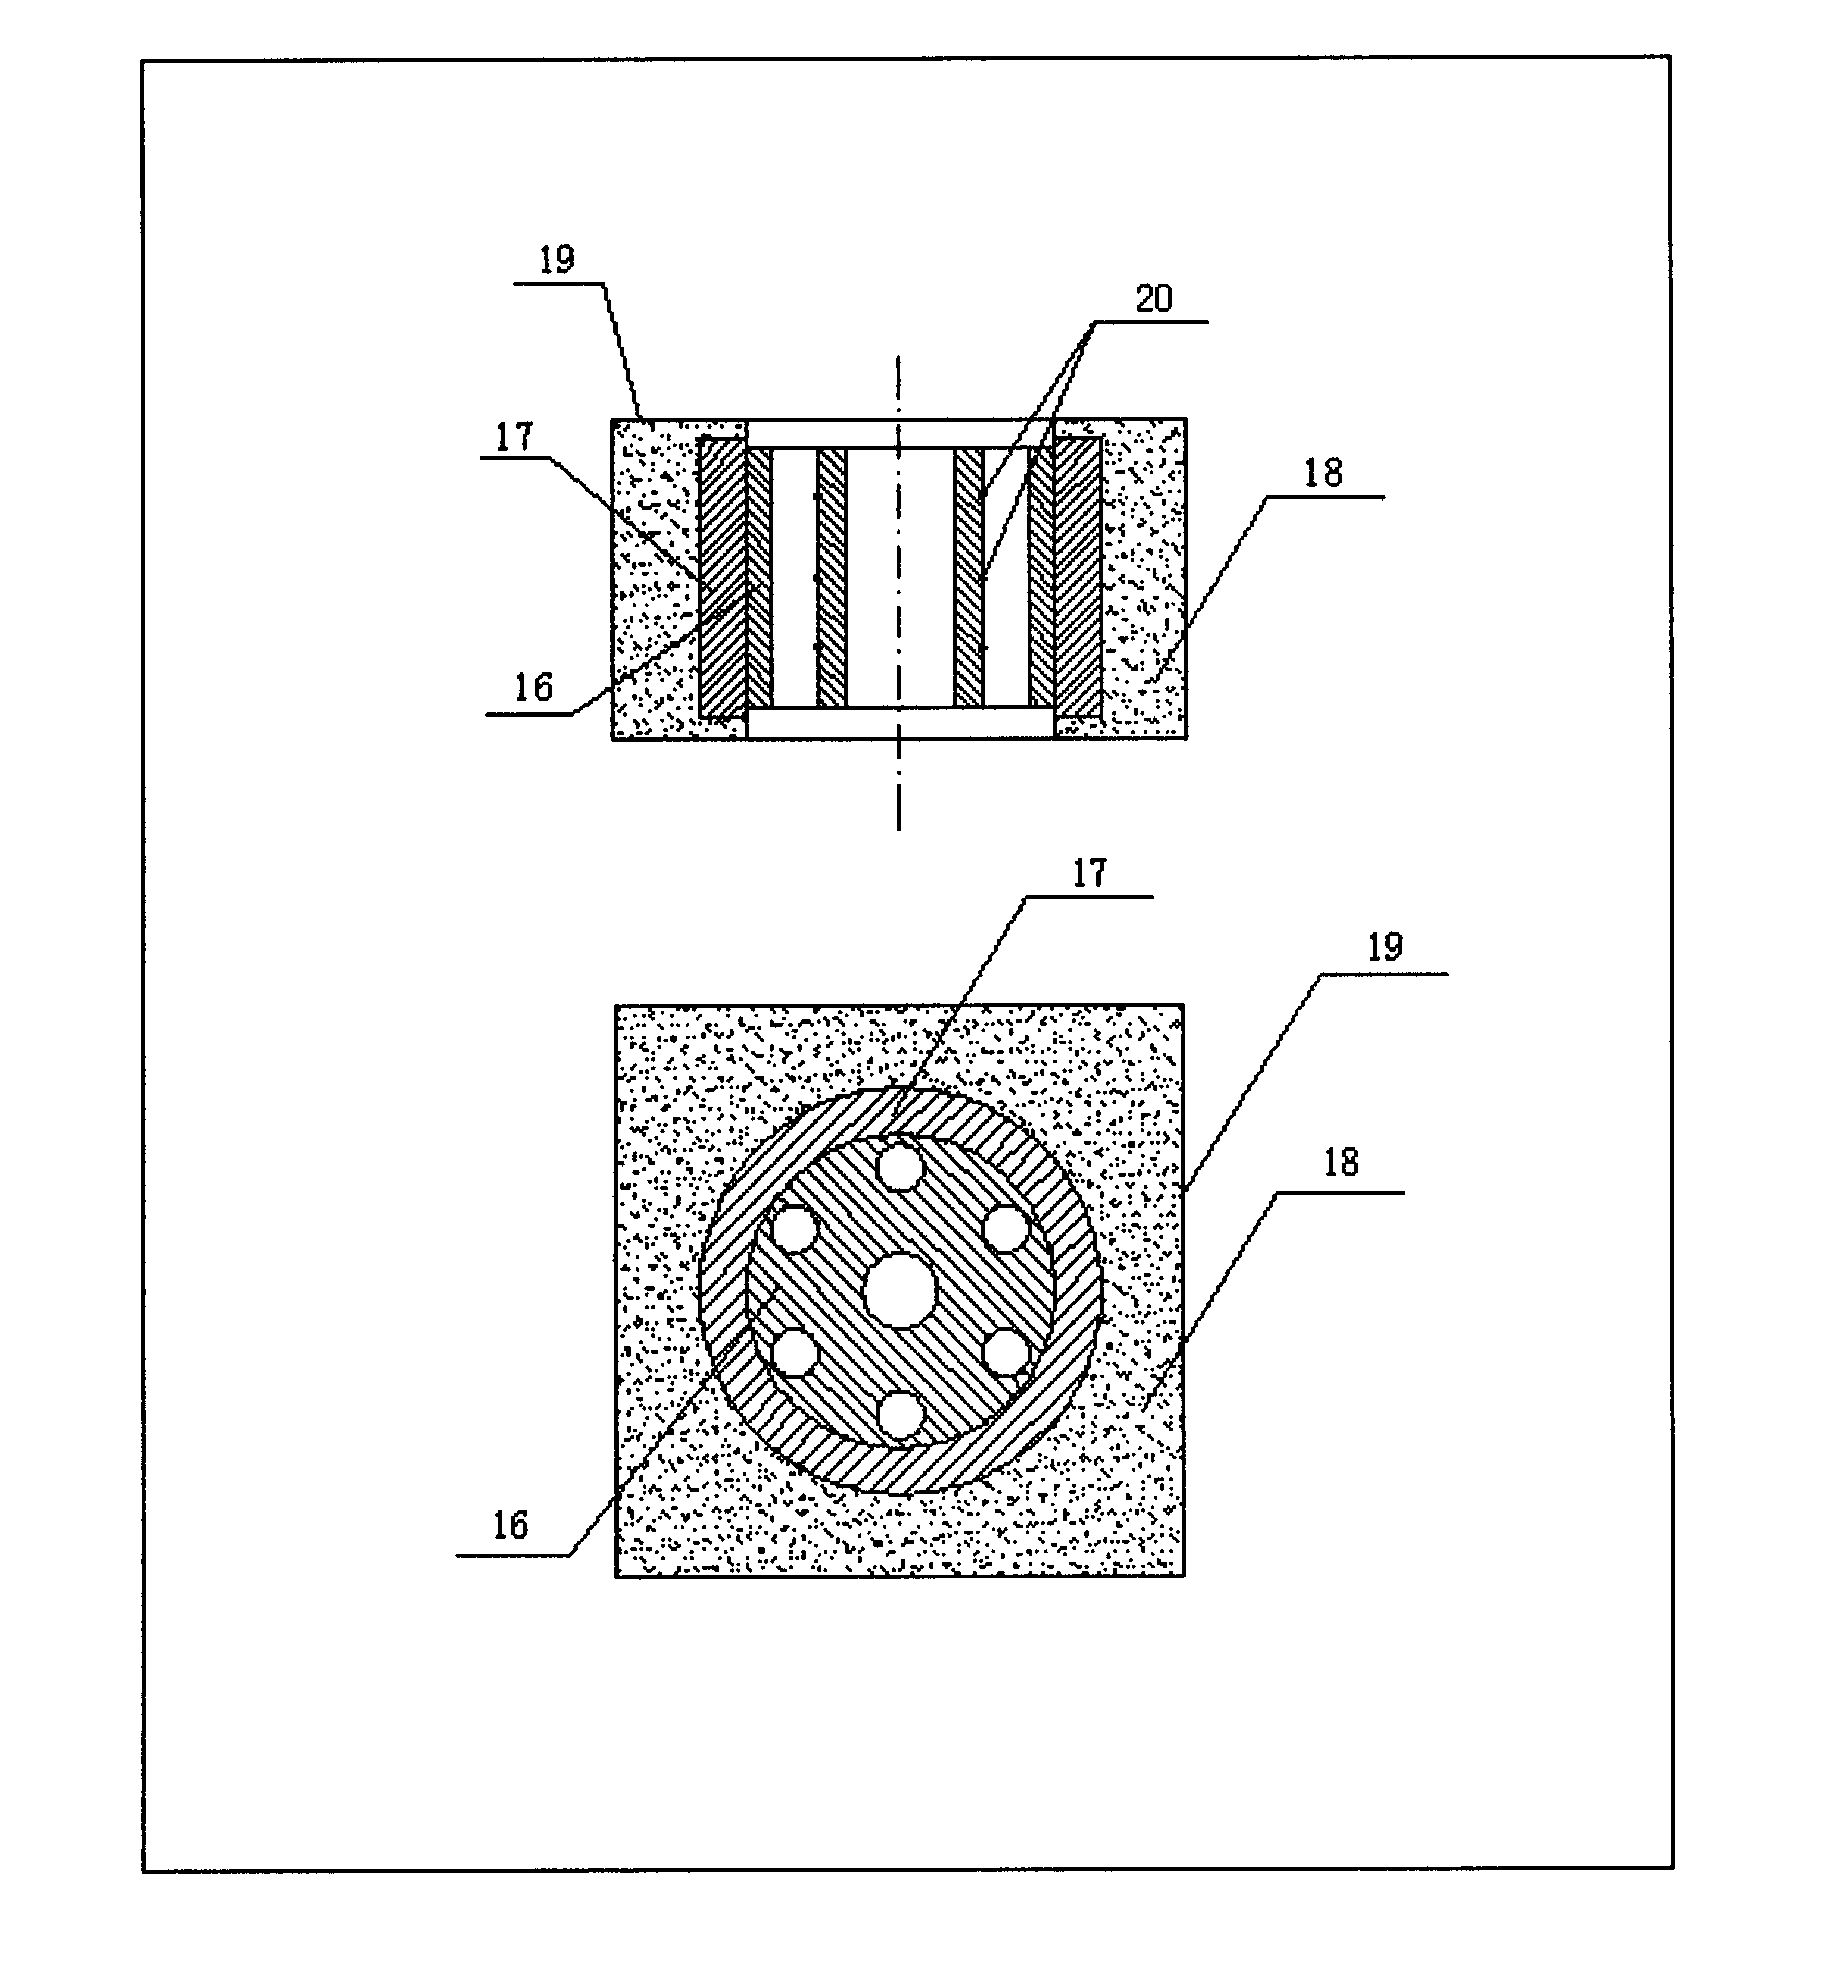 A multi-channel differential reaction device